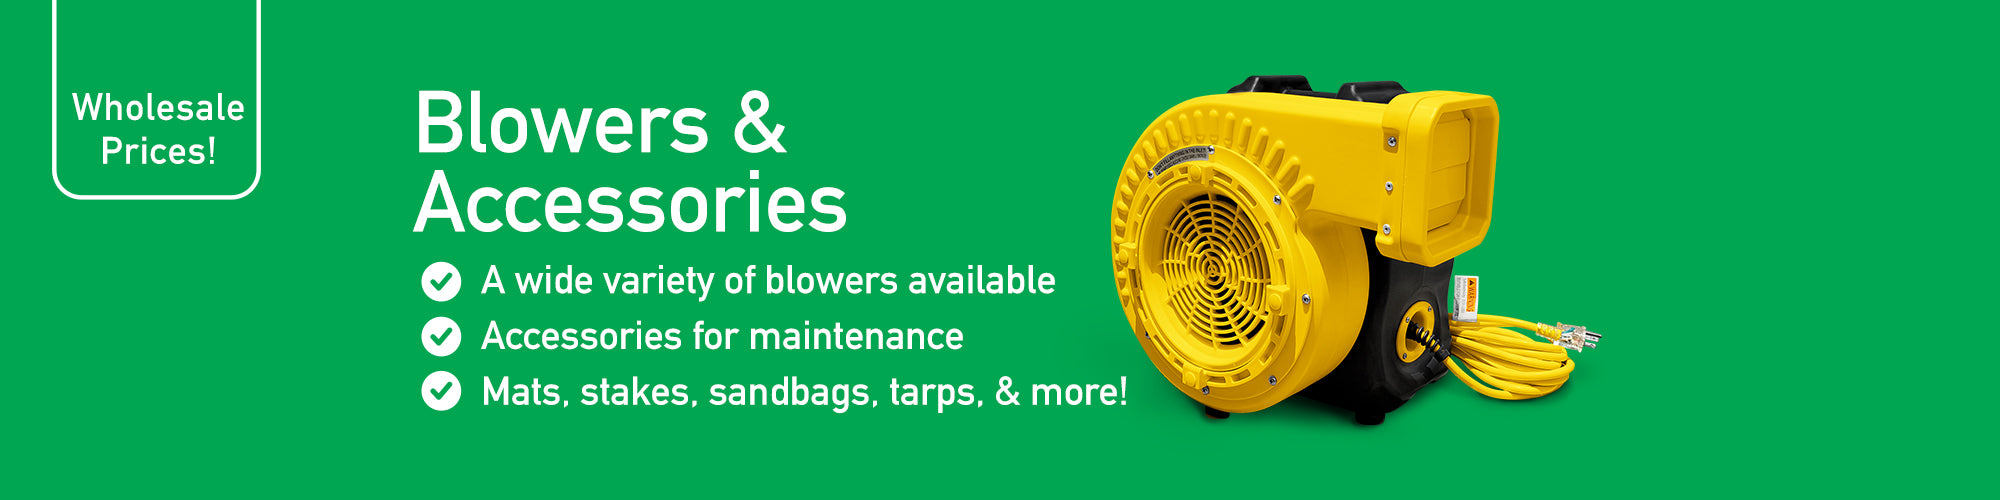 Blowers and Accessories